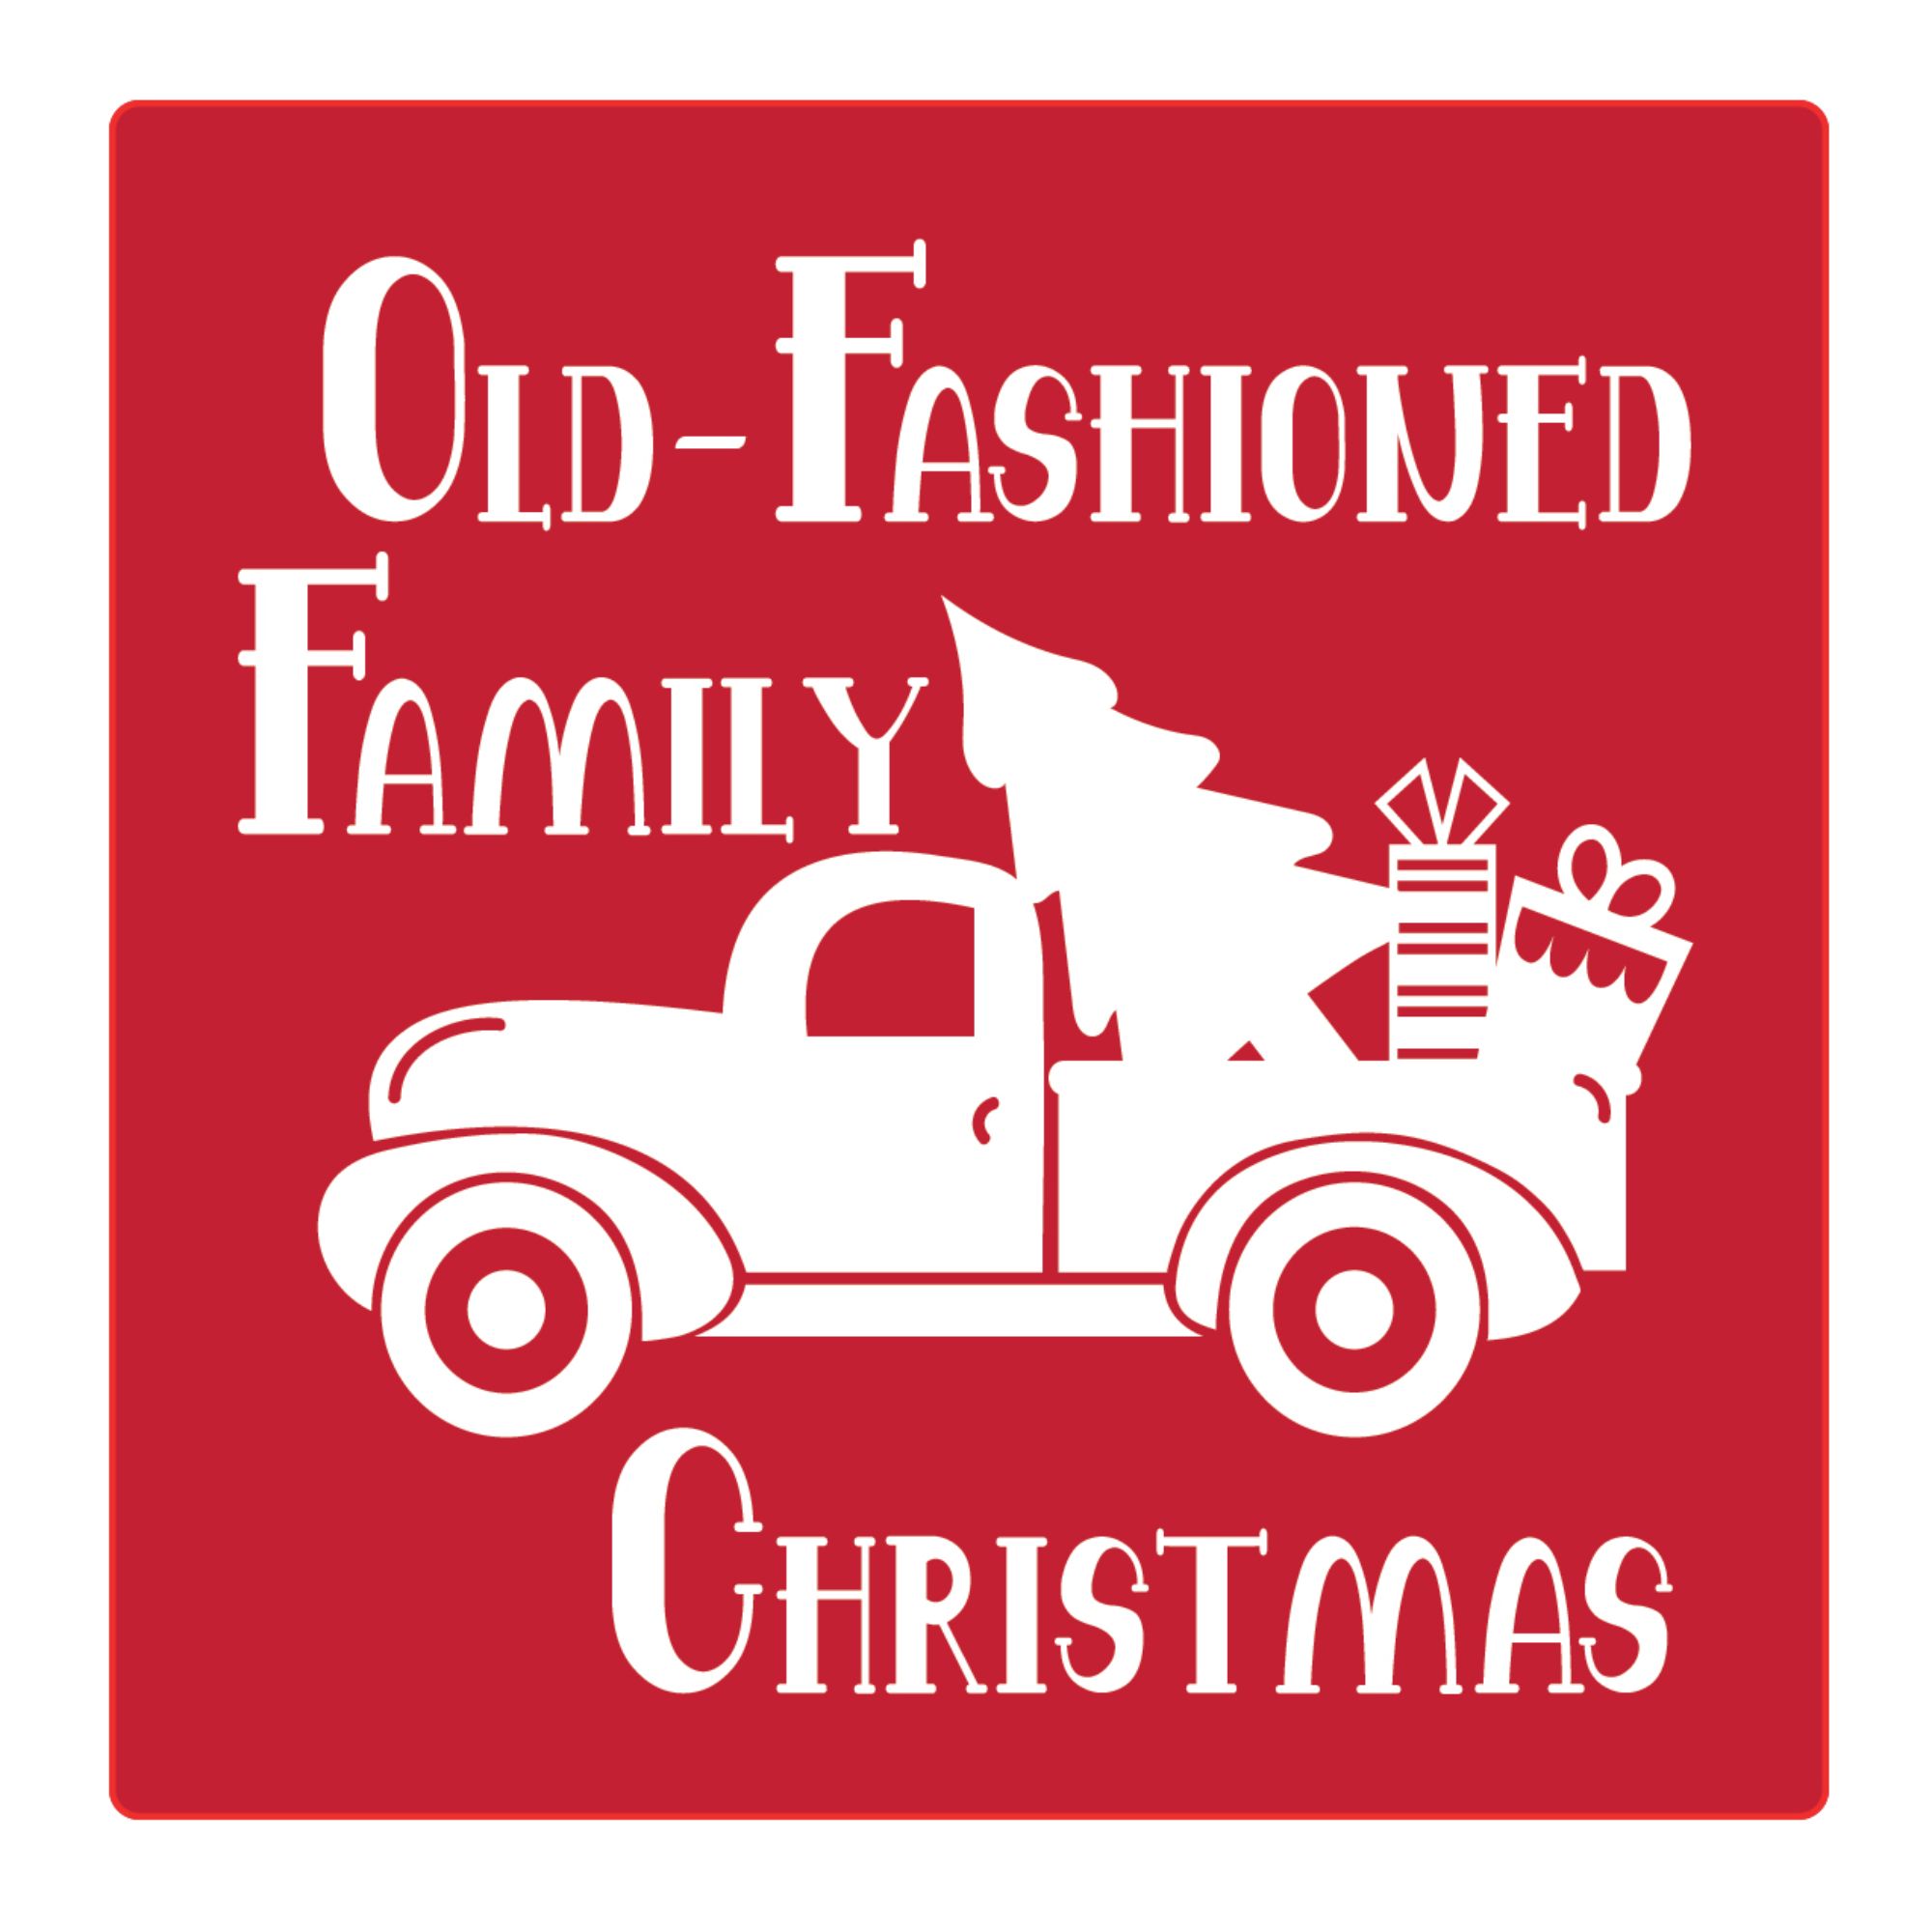 Christmas by Krebs Set of 4 Red and White "OLD FASHIONED FAMILY CHRISTMAS" Square Coasters 4"